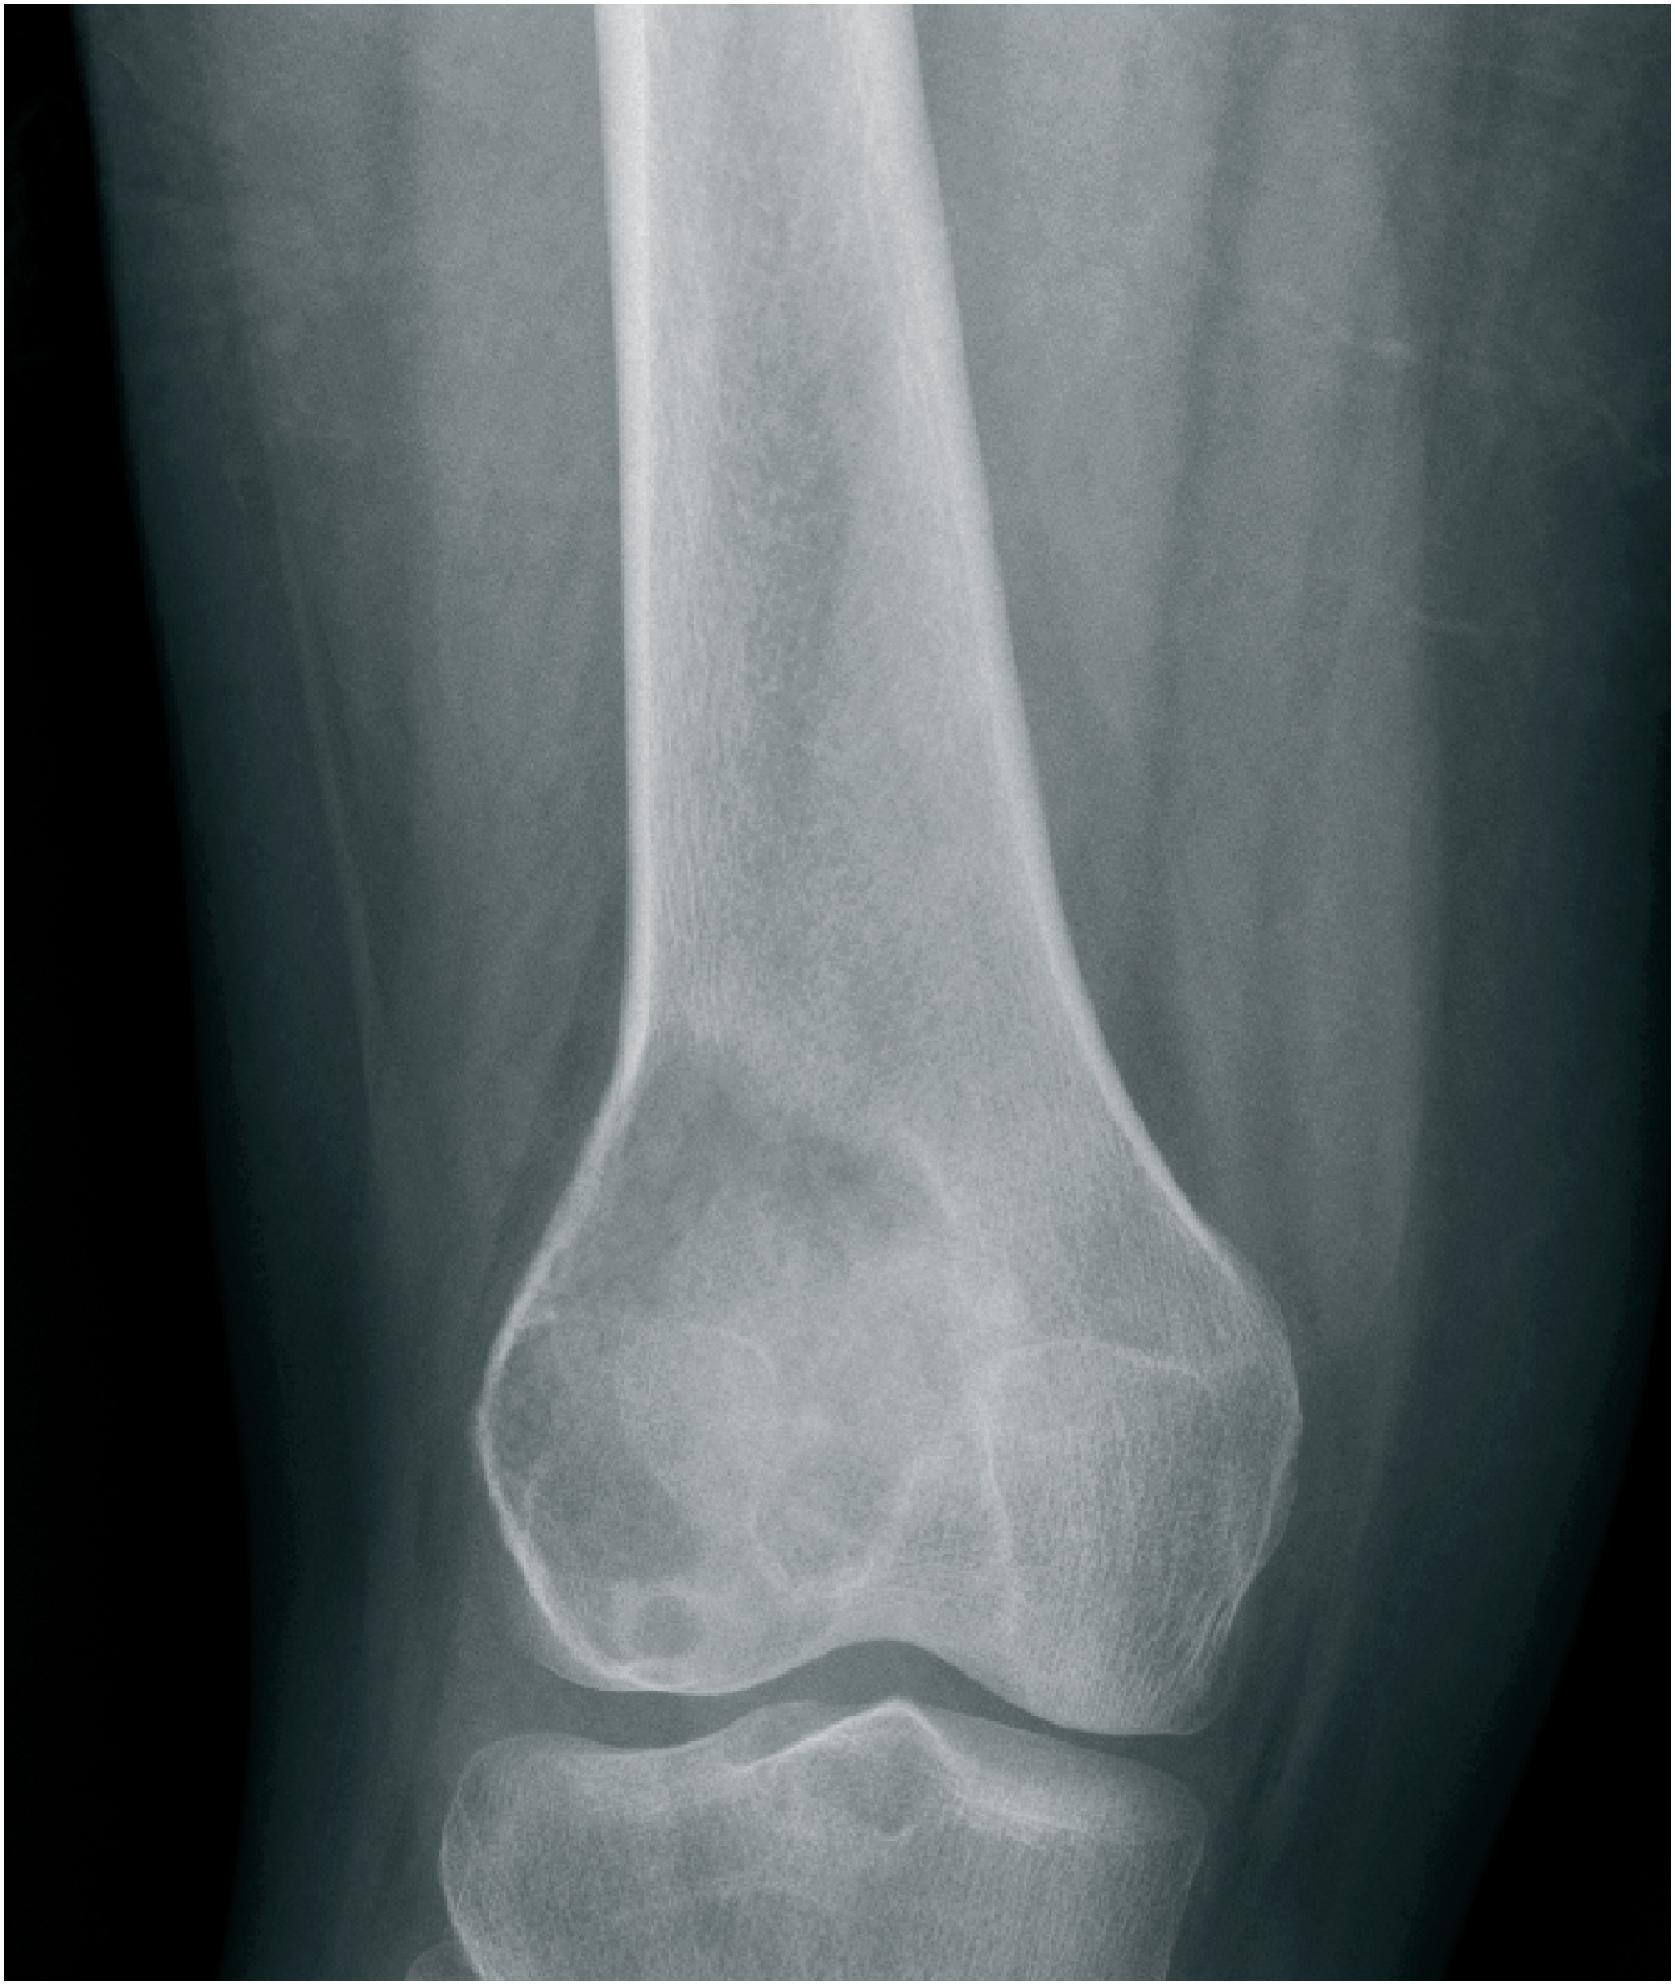 Fig. 20.1, Plain radiograph of a femoral tumor showing a well-defined, eccentric, lytic mass involving the distal metaphysis and epiphysis, extending to the subchondral plate.